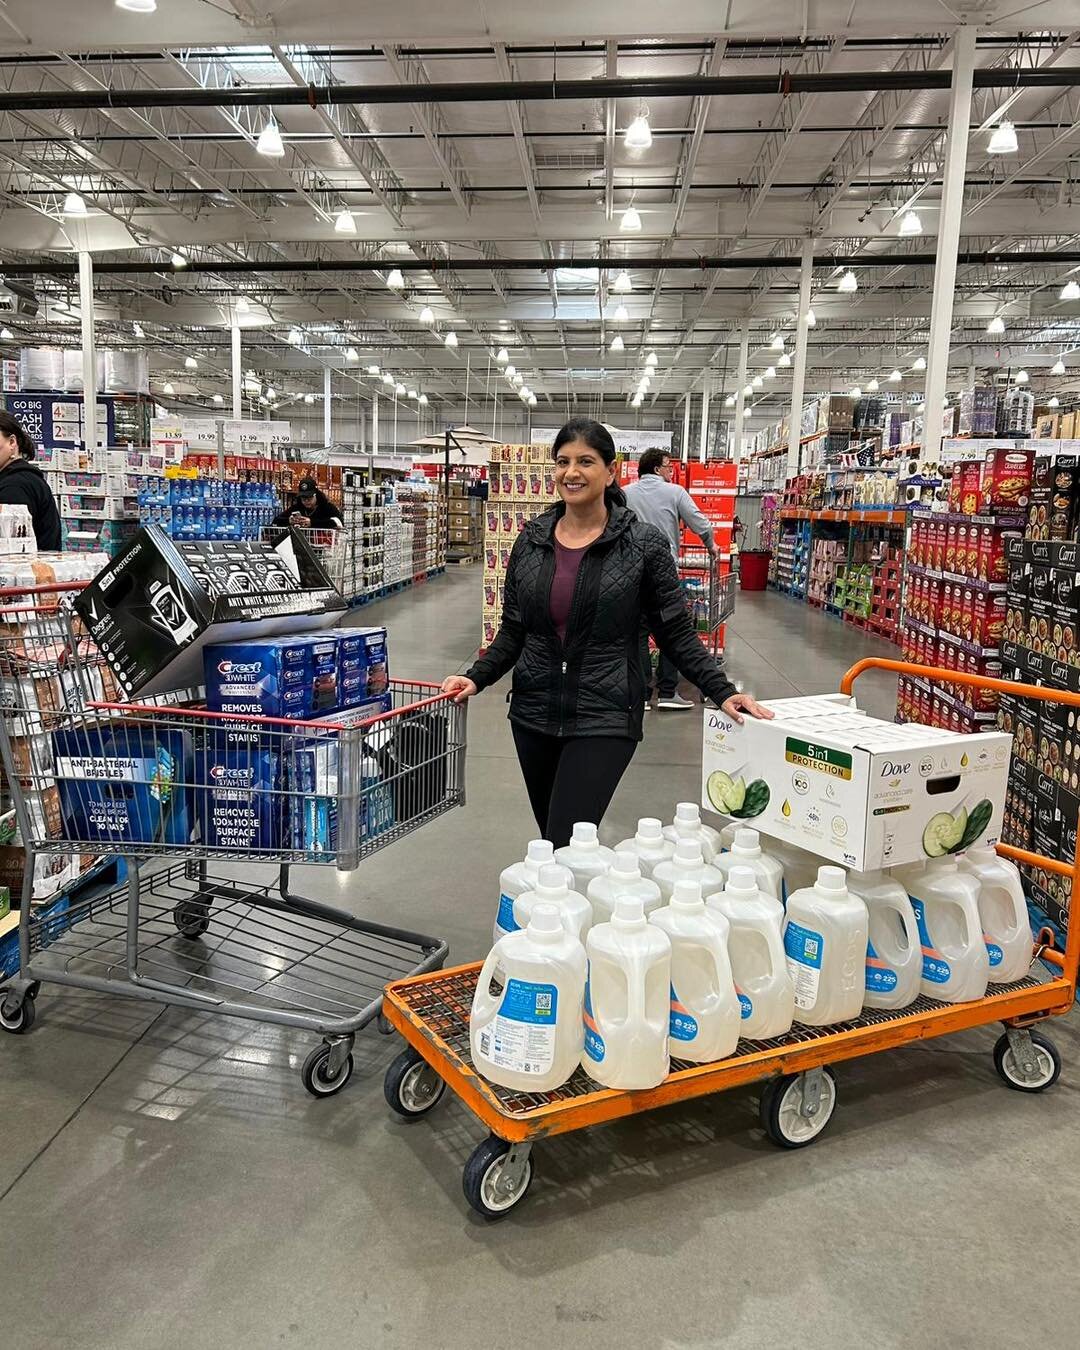 Every year an active volunteer, Nooshin Bagheri, reaches out to her very generous community to do a few drives for Ethaar. This Ramadan she had a hygiene drive that benefited 20 larger families. She lovingly shops, packages and delivers the items to 